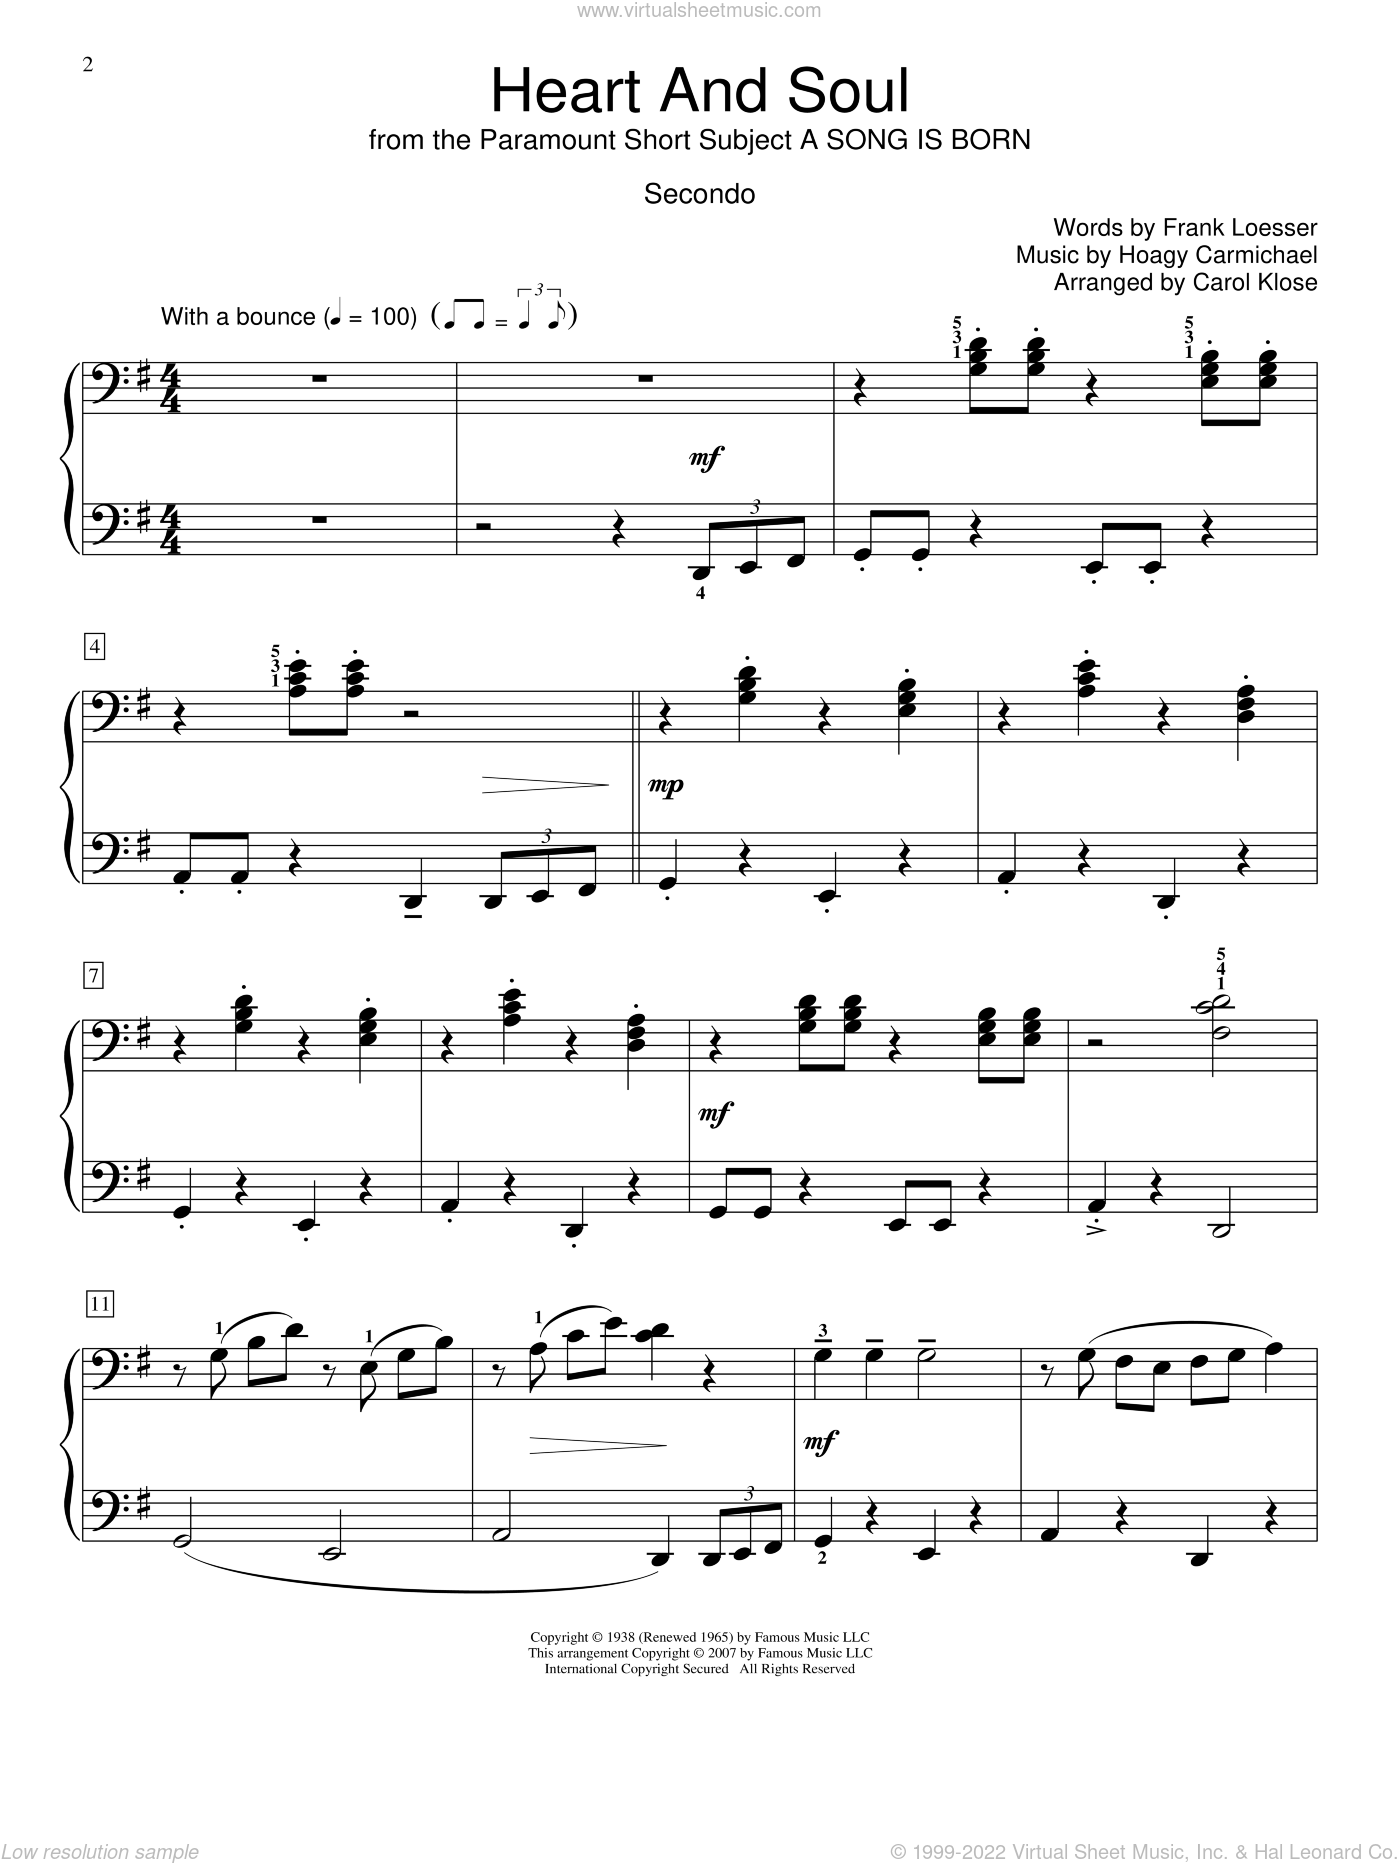 Carmichael - Heart And Soul sheet music for piano four hands